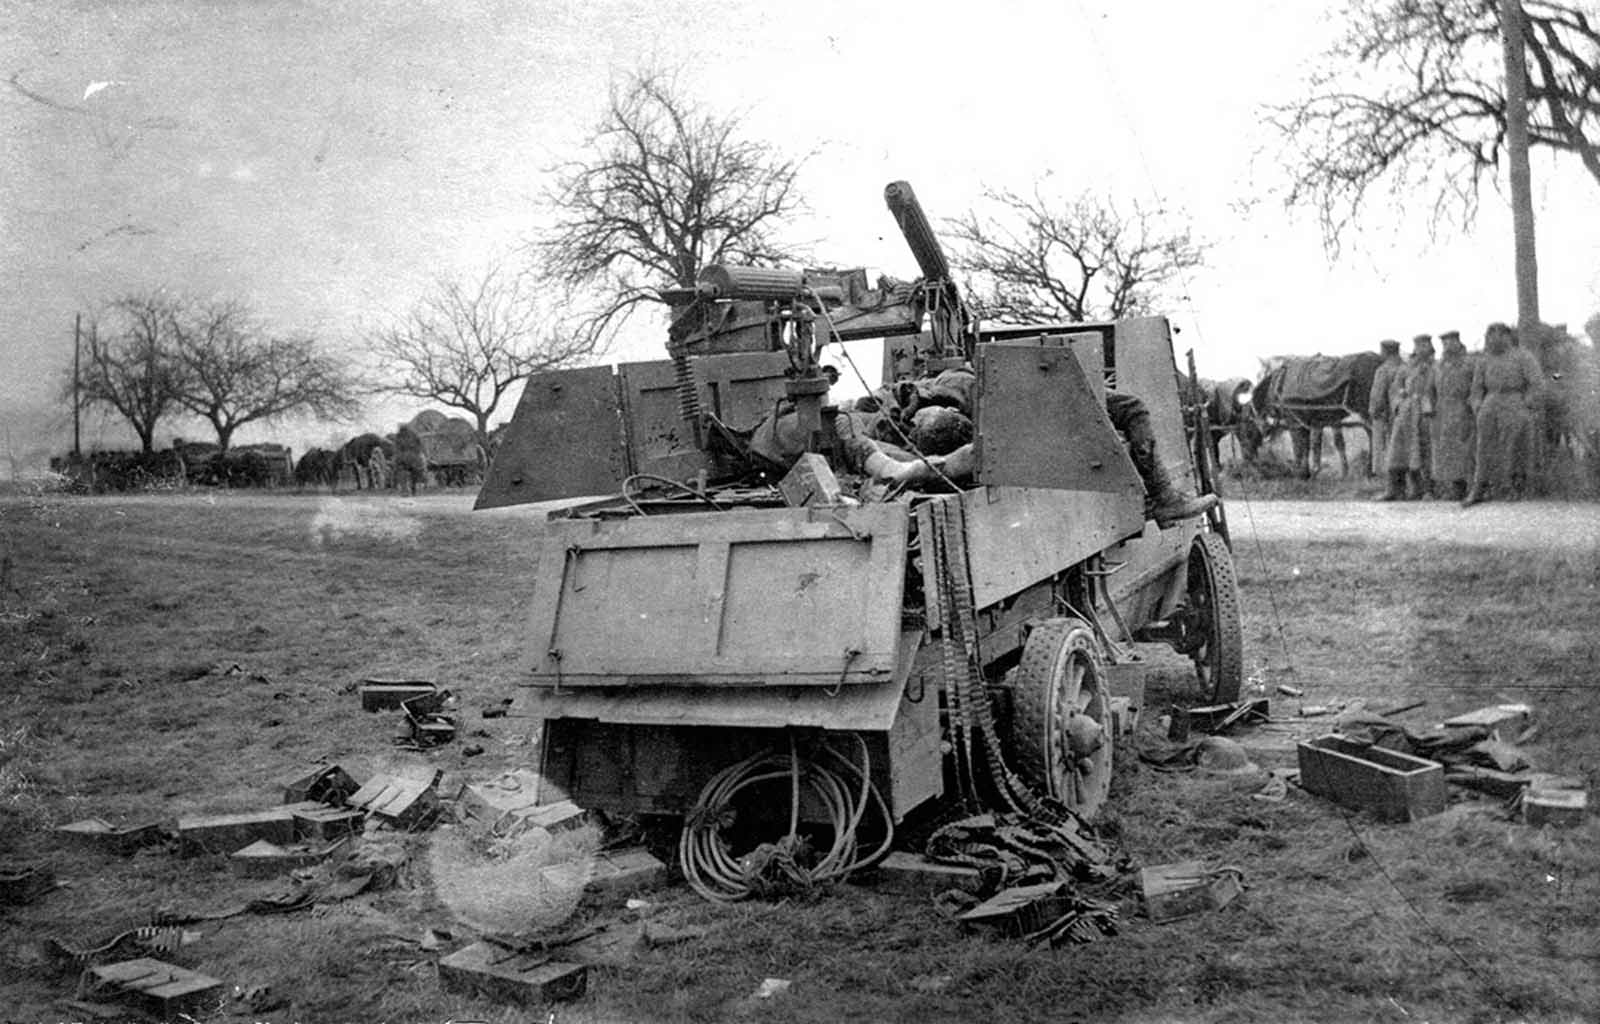 A German column looks over a destroyed Canadian Armored Autocar, the bodies of Canadian soldiers, empty belts, and cartridge boxes strewn about.